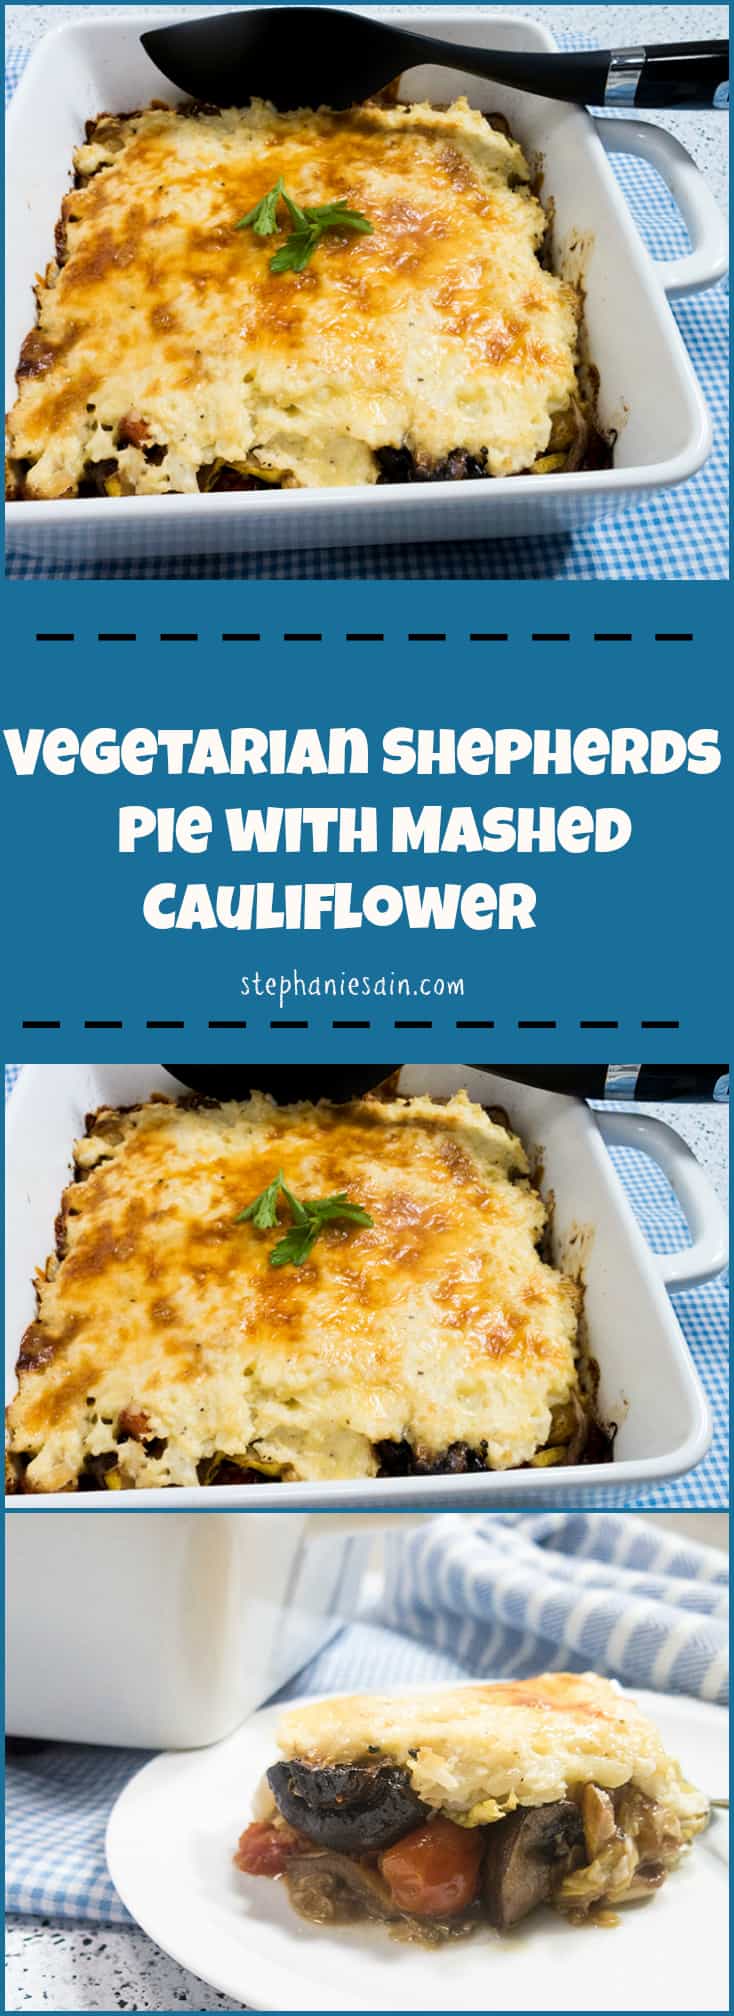 Vegetarian Shepherds Pie with Mashed Cauliflower is packed with marinated veggies and then topped with mashed cauliflower. A different version for a family favorite. Gluten Free and Vegetarian.